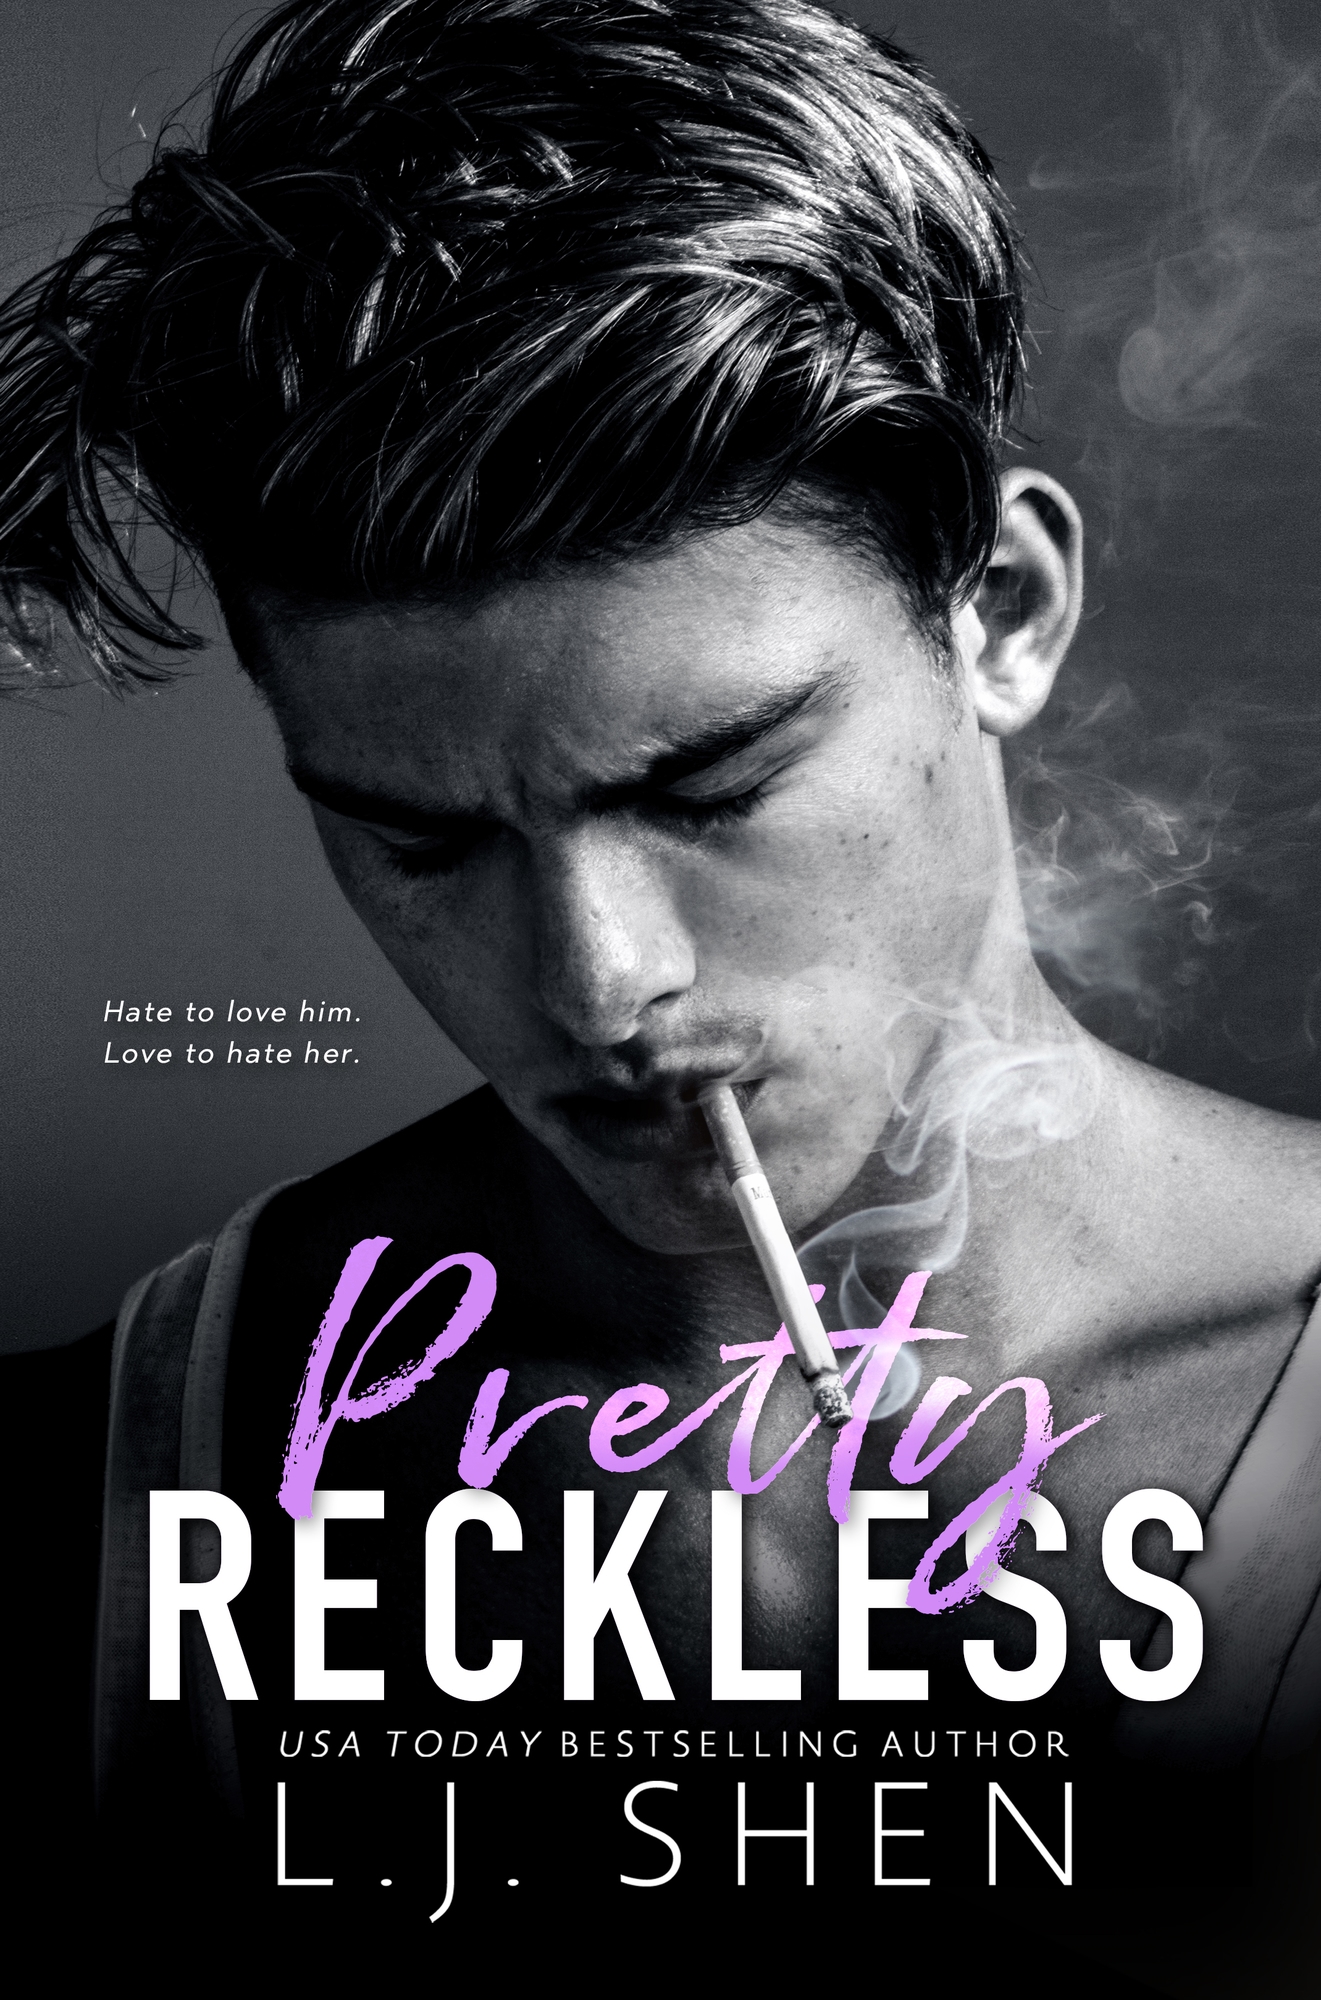 Pretty Reckless by L.J. Shen [Cover Reveal]